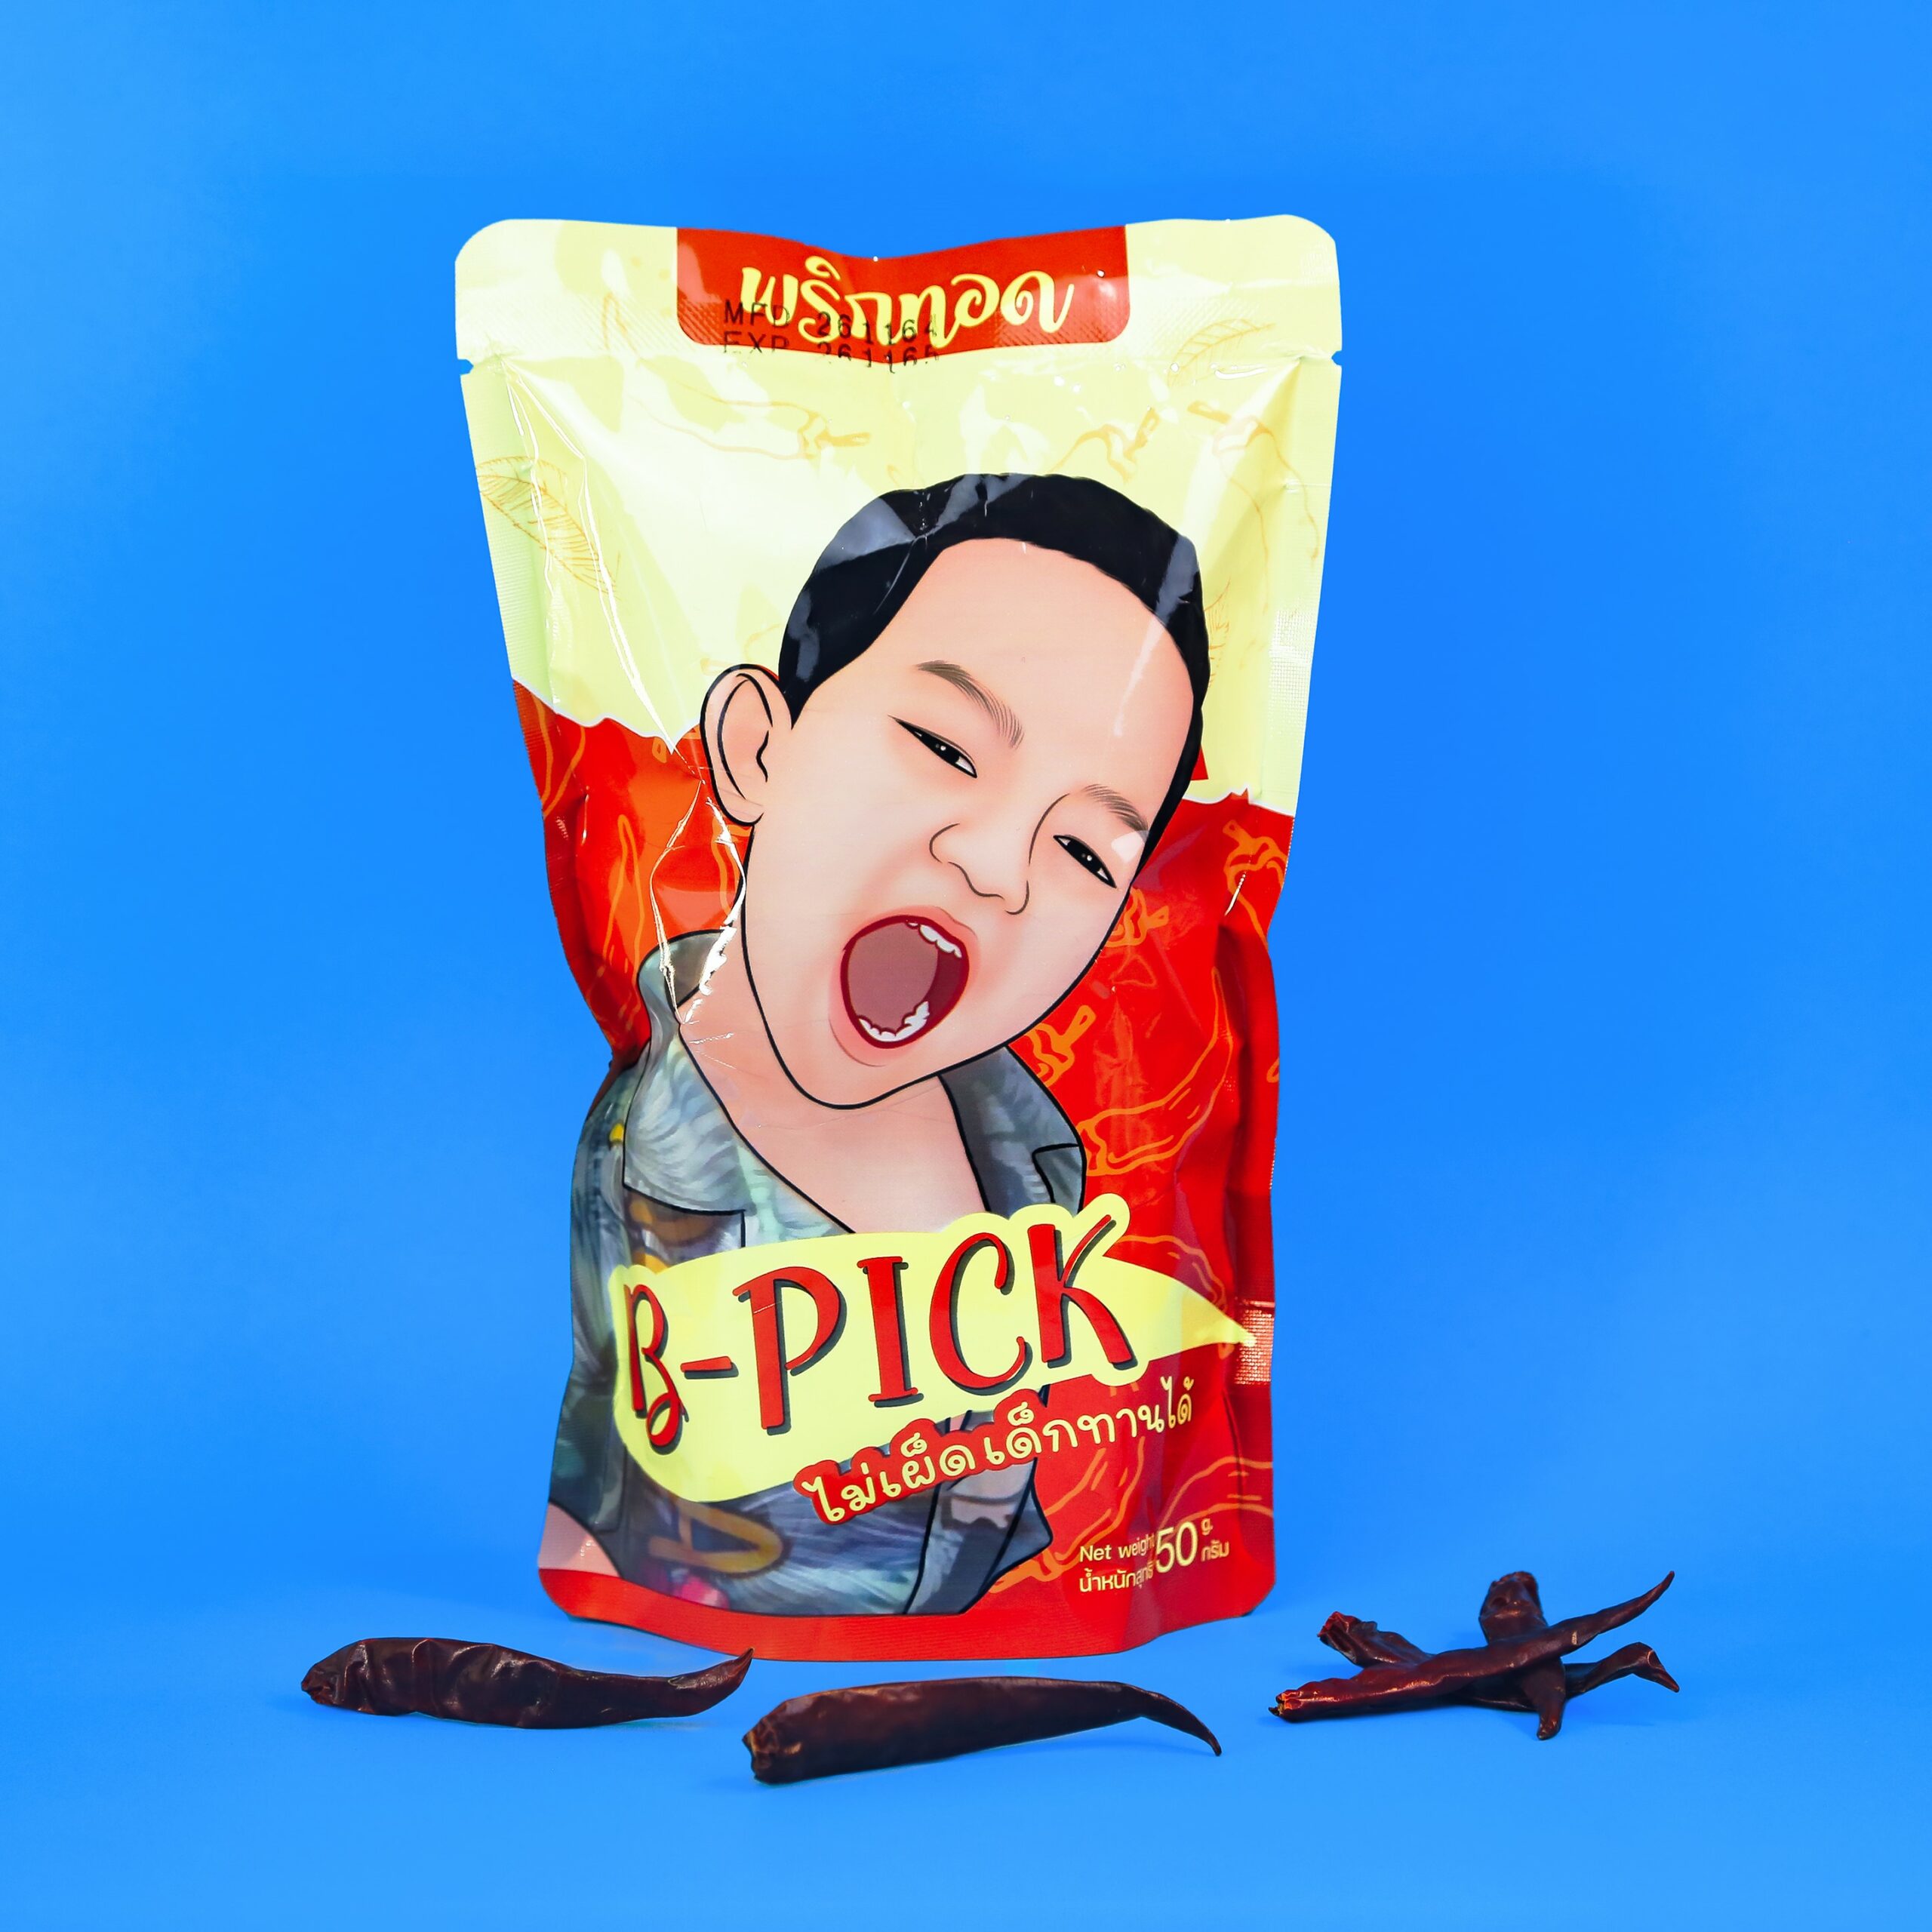 Prik Tod Fried chili with sesame snack. Local Thai snack brand with a face of a kid on the packaging.